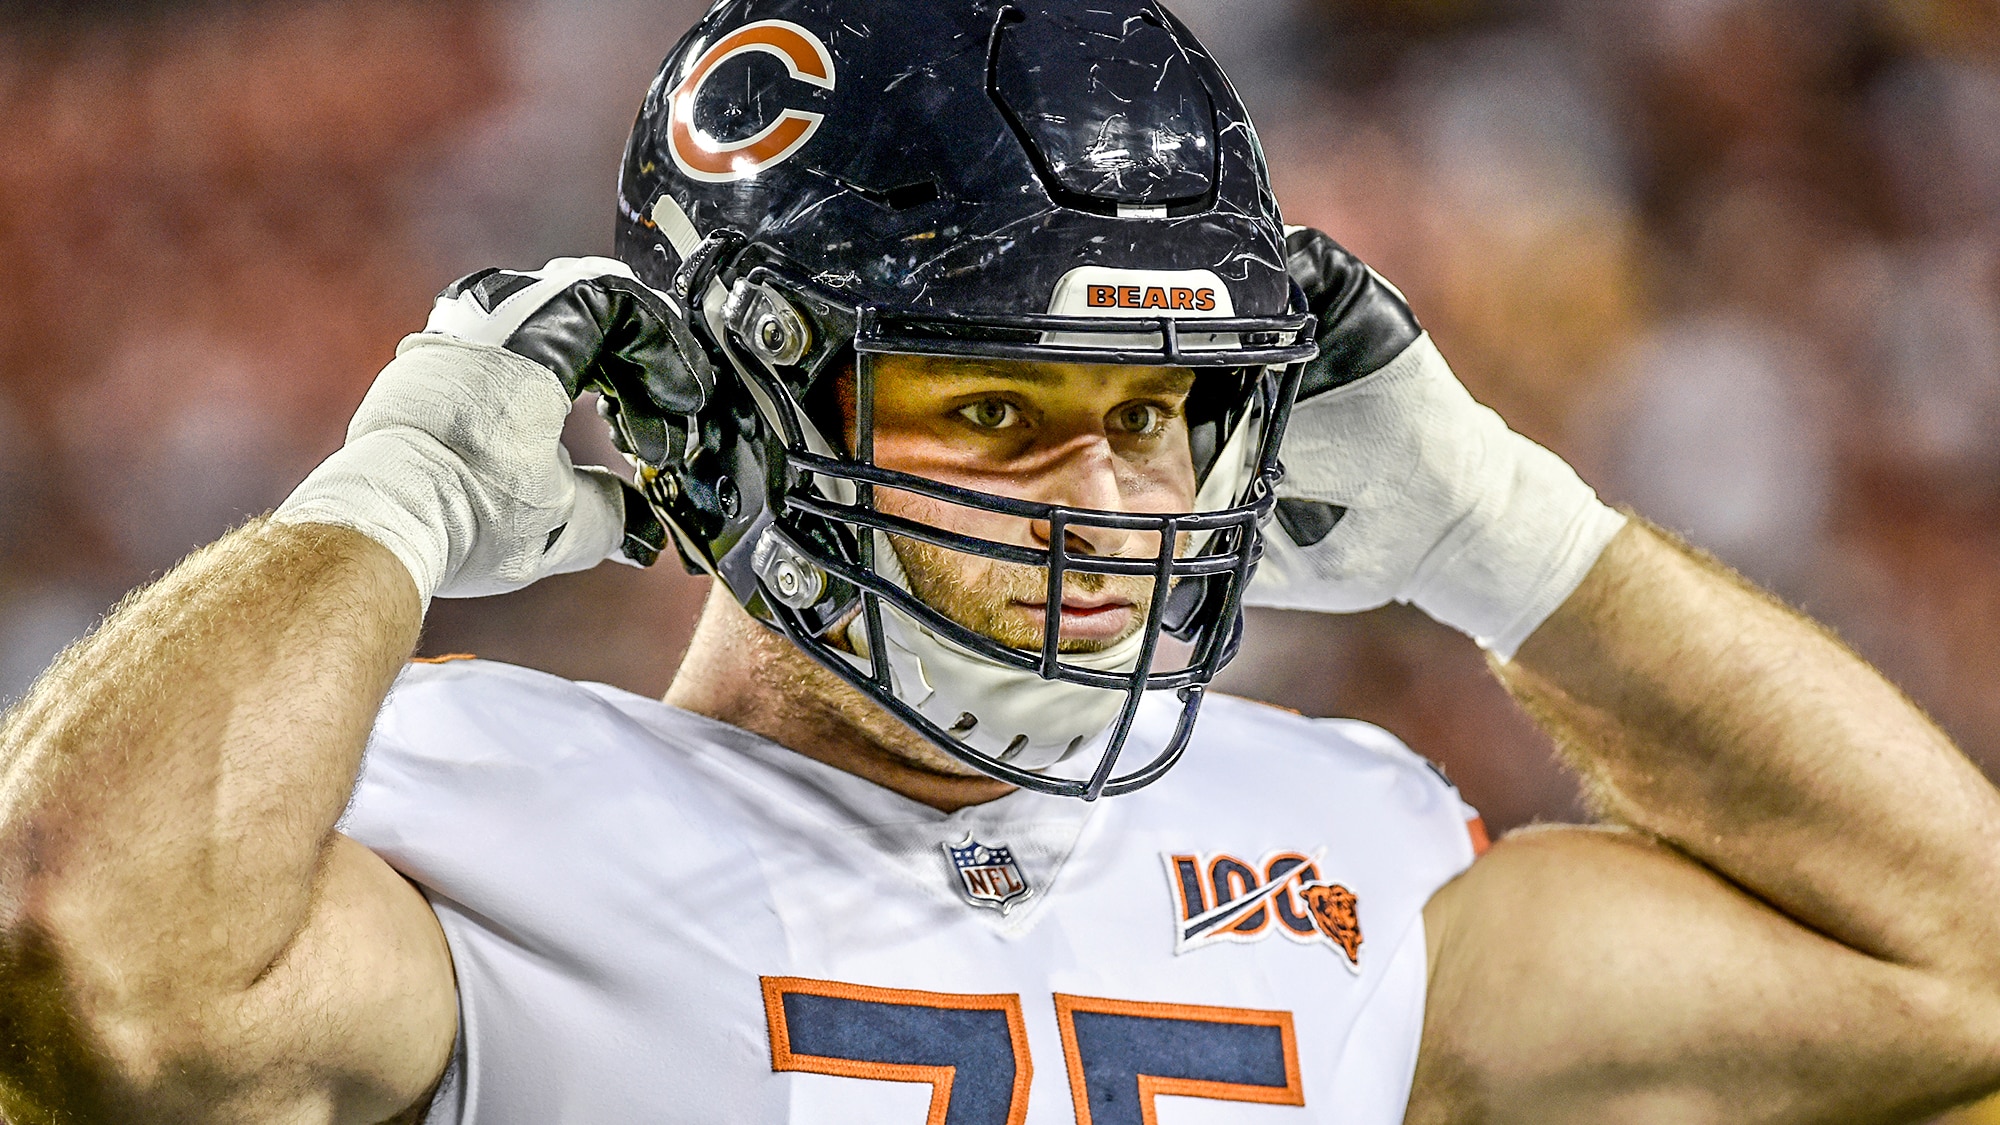 LANDOVER, MD - SEPTEMBER 23: Bears G Kyle Long (75) straps up his helmet and he waits for the game to start during the Chicago Bears vs. Washington Redskins Monday Night Football game September 23, 2019 at FedEx Field in Landover, MD.